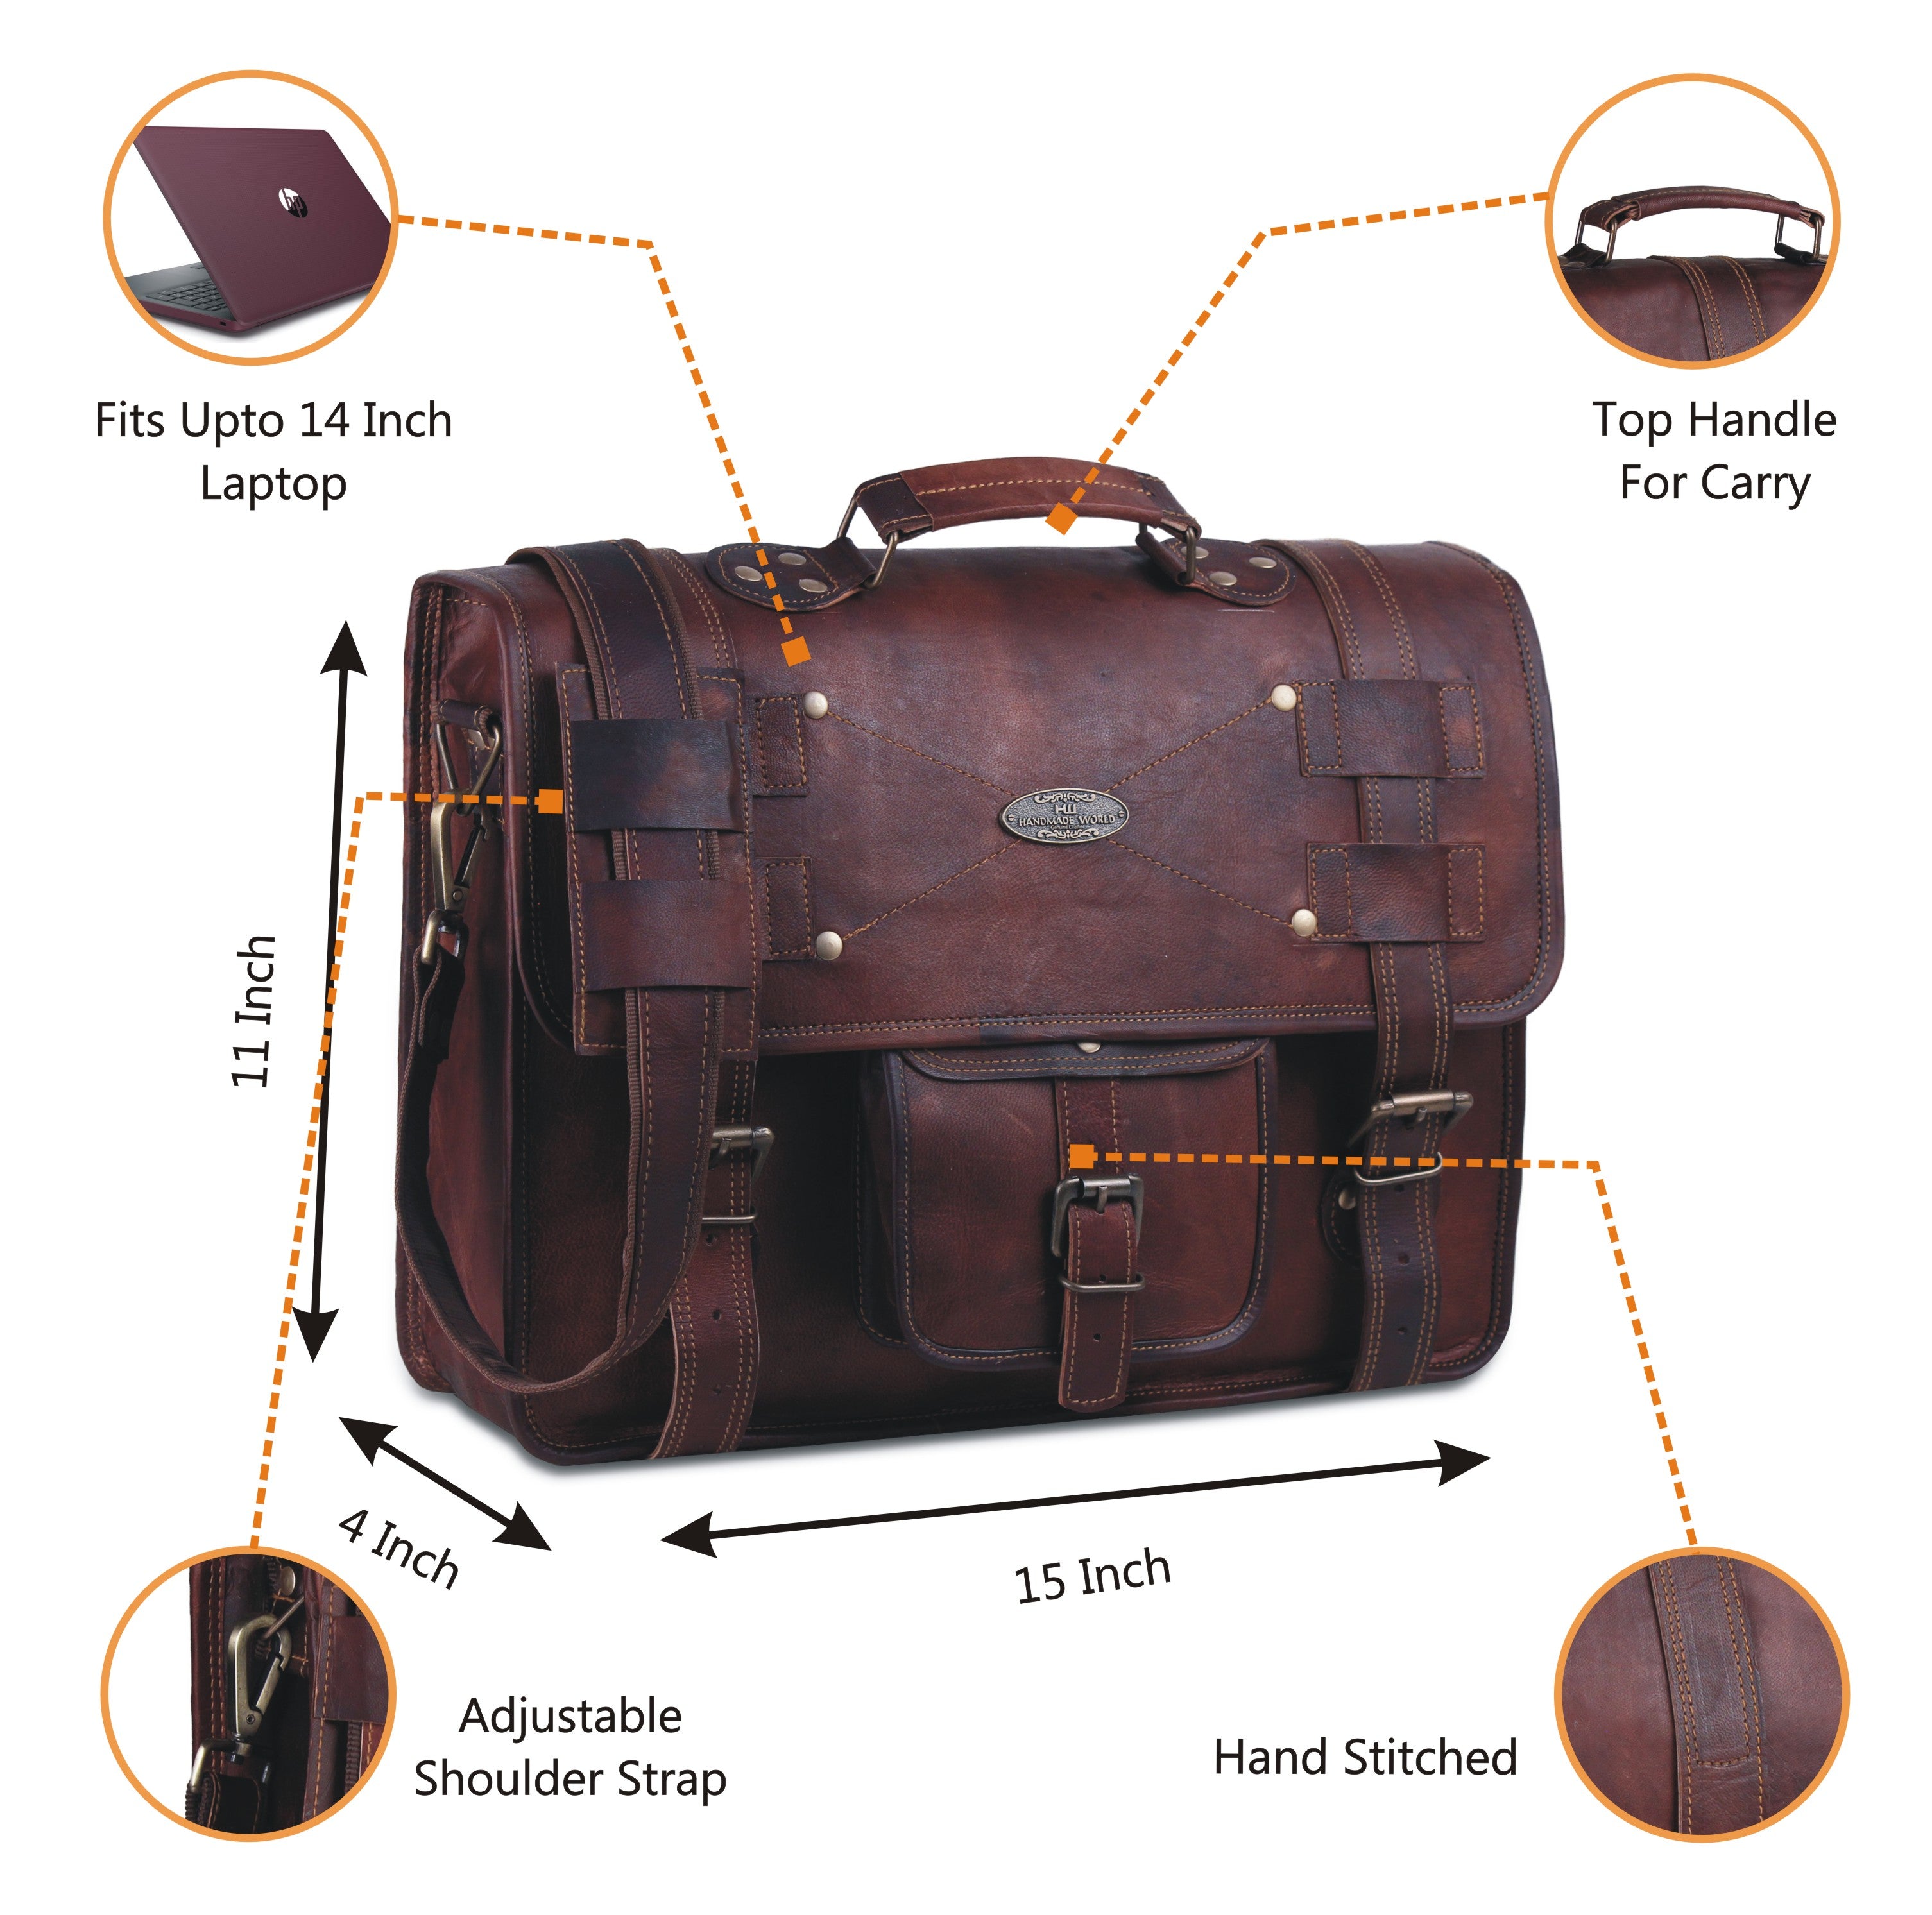 Hulsh Vintage Leather Laptop Bag for Men Full Grain Large Leather Messenger Bag for Men 18 Inches with Rustic Look Best Leather Briefcase